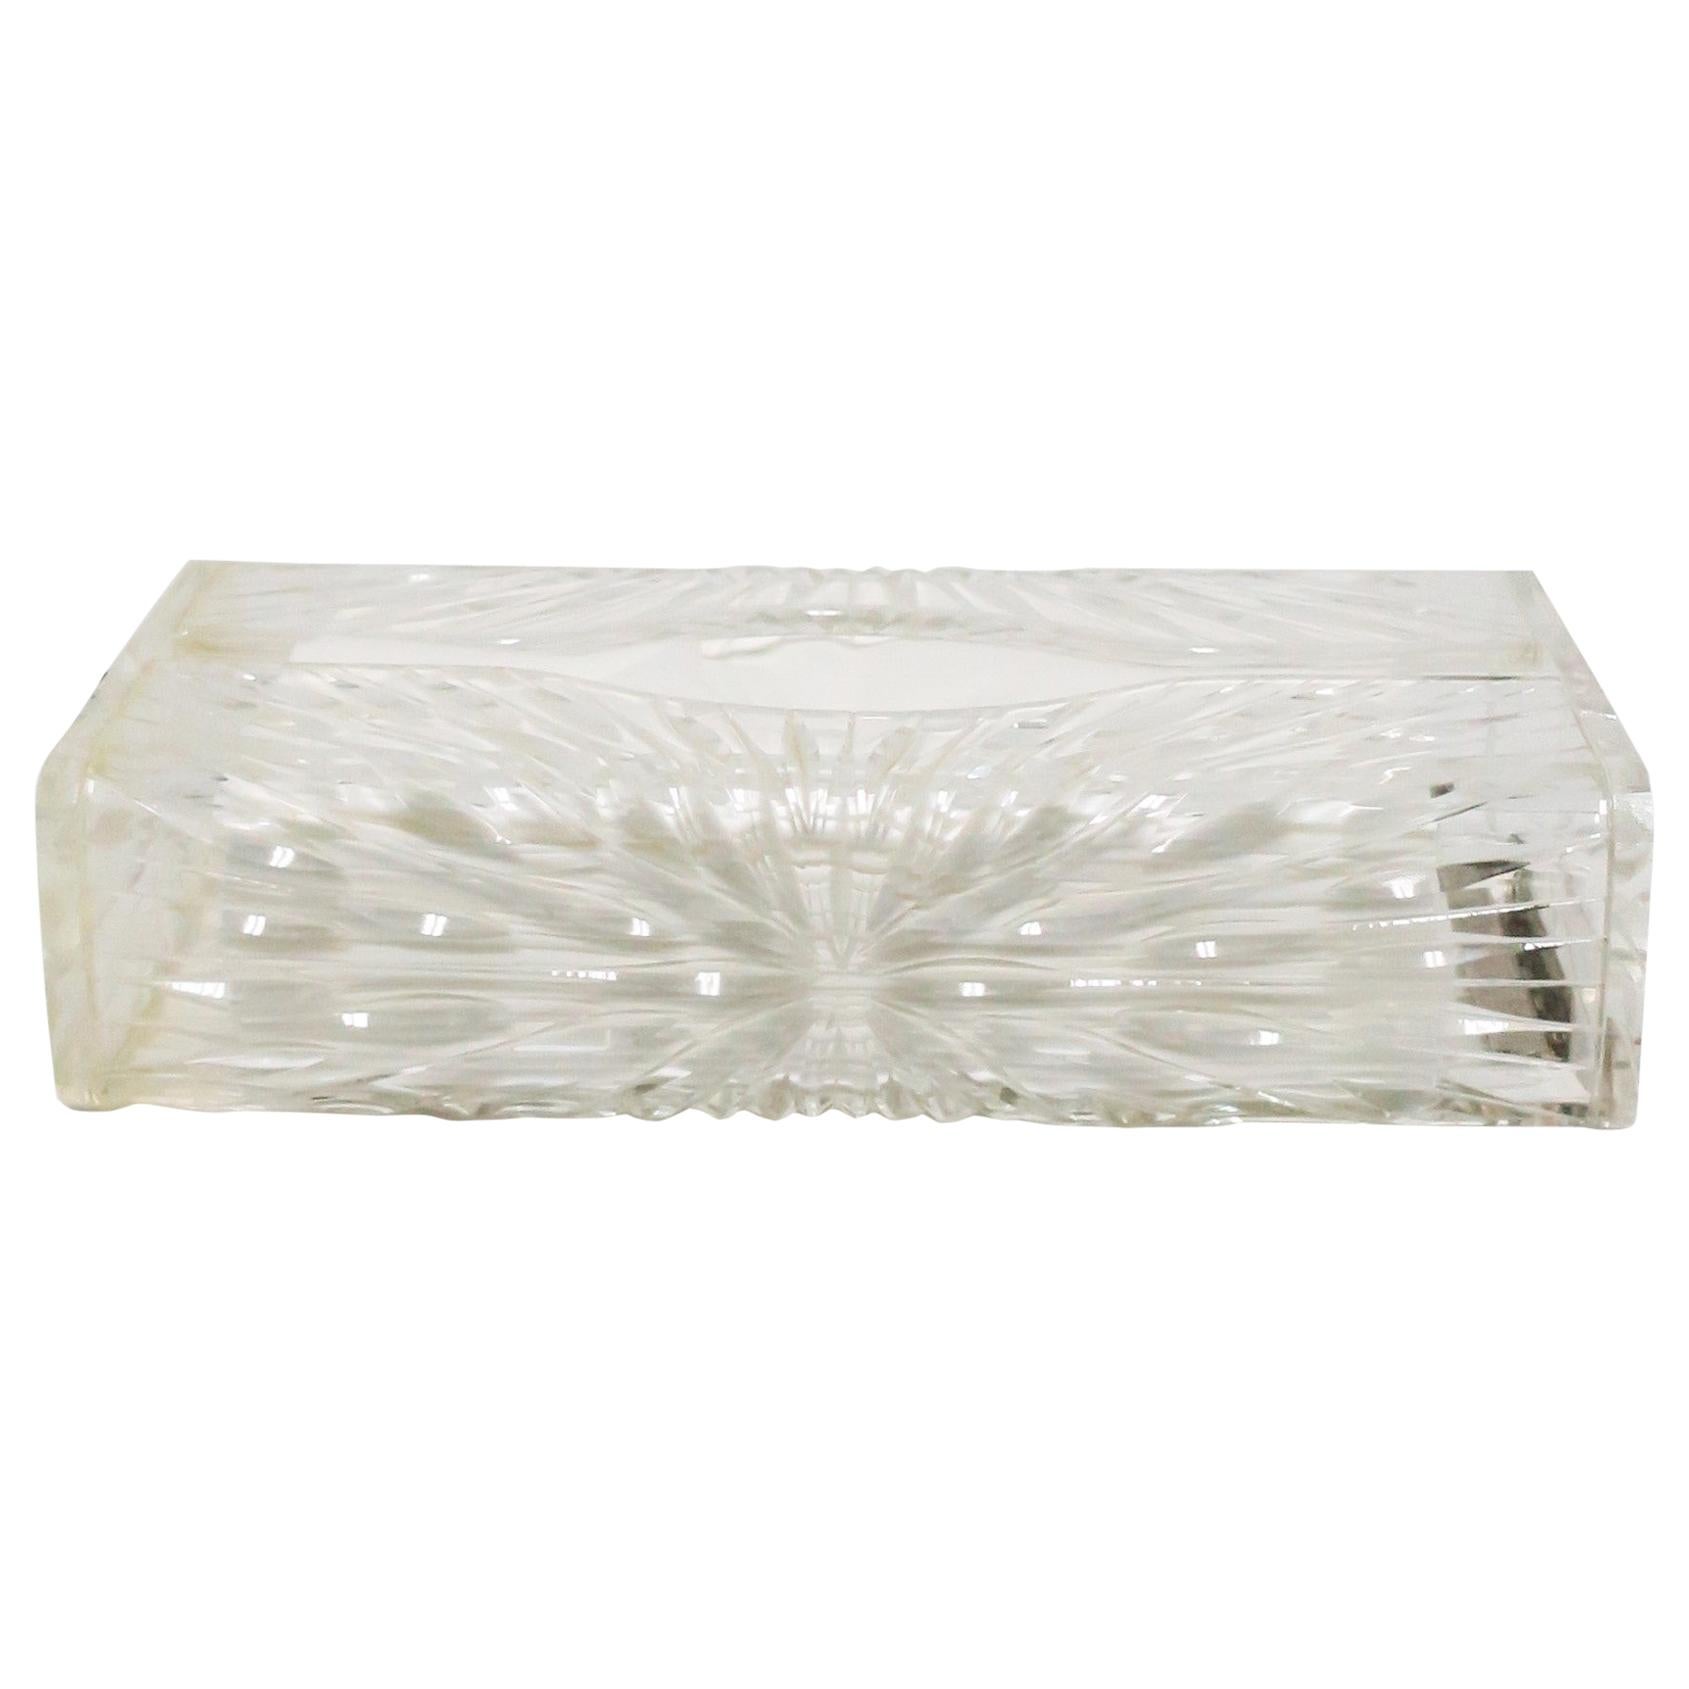 Lucite Tissue Box Cover Holder by Wilardy